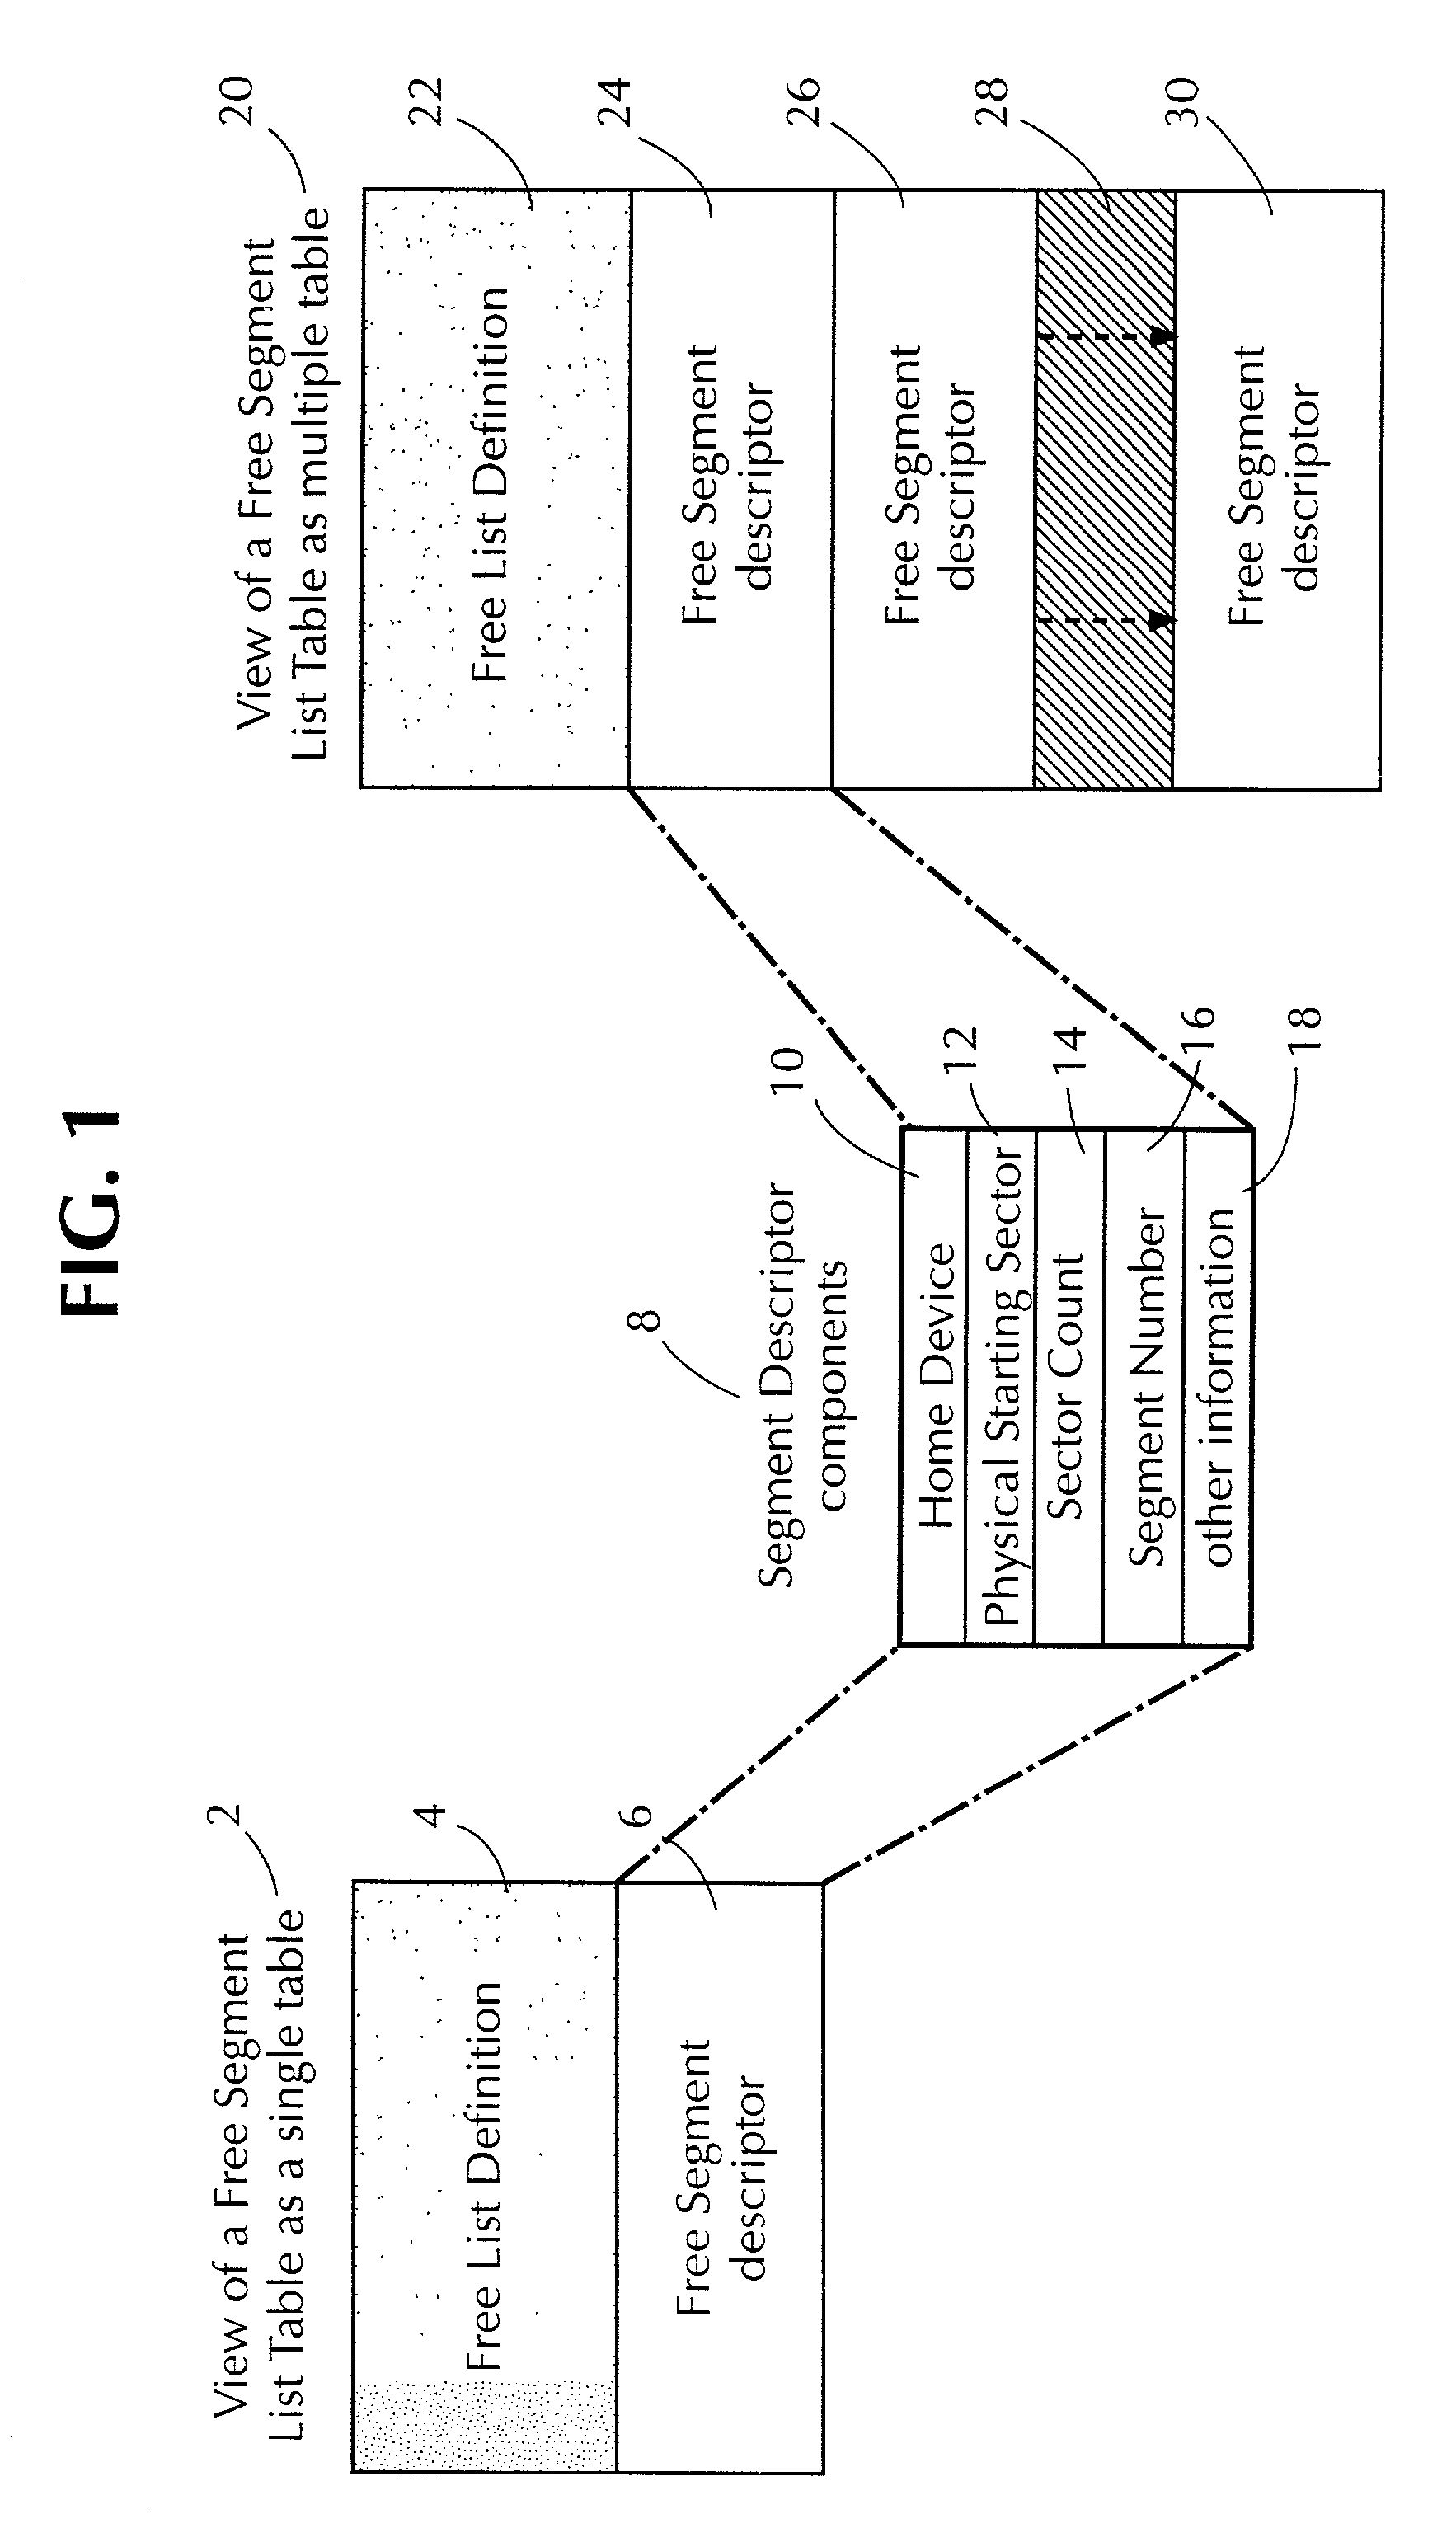 Dynamic allocation of computer memory